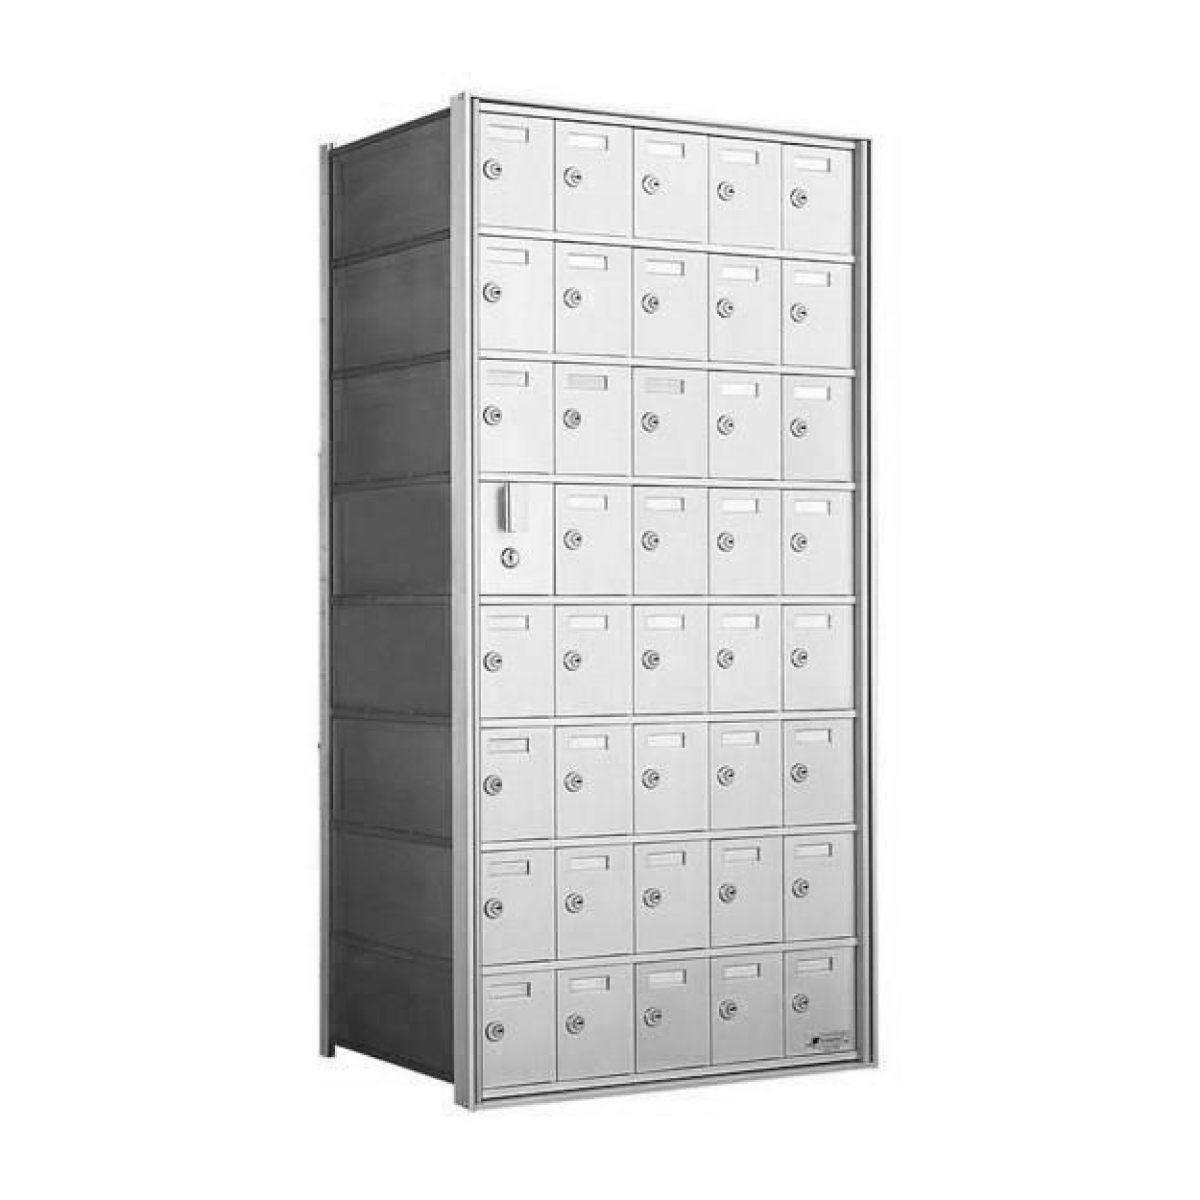 8 Doors High x 6 Doors (47 Tenants) 1600 Front-Load Private Distribution Mailbox in Anodized Aluminum Finish Product Image